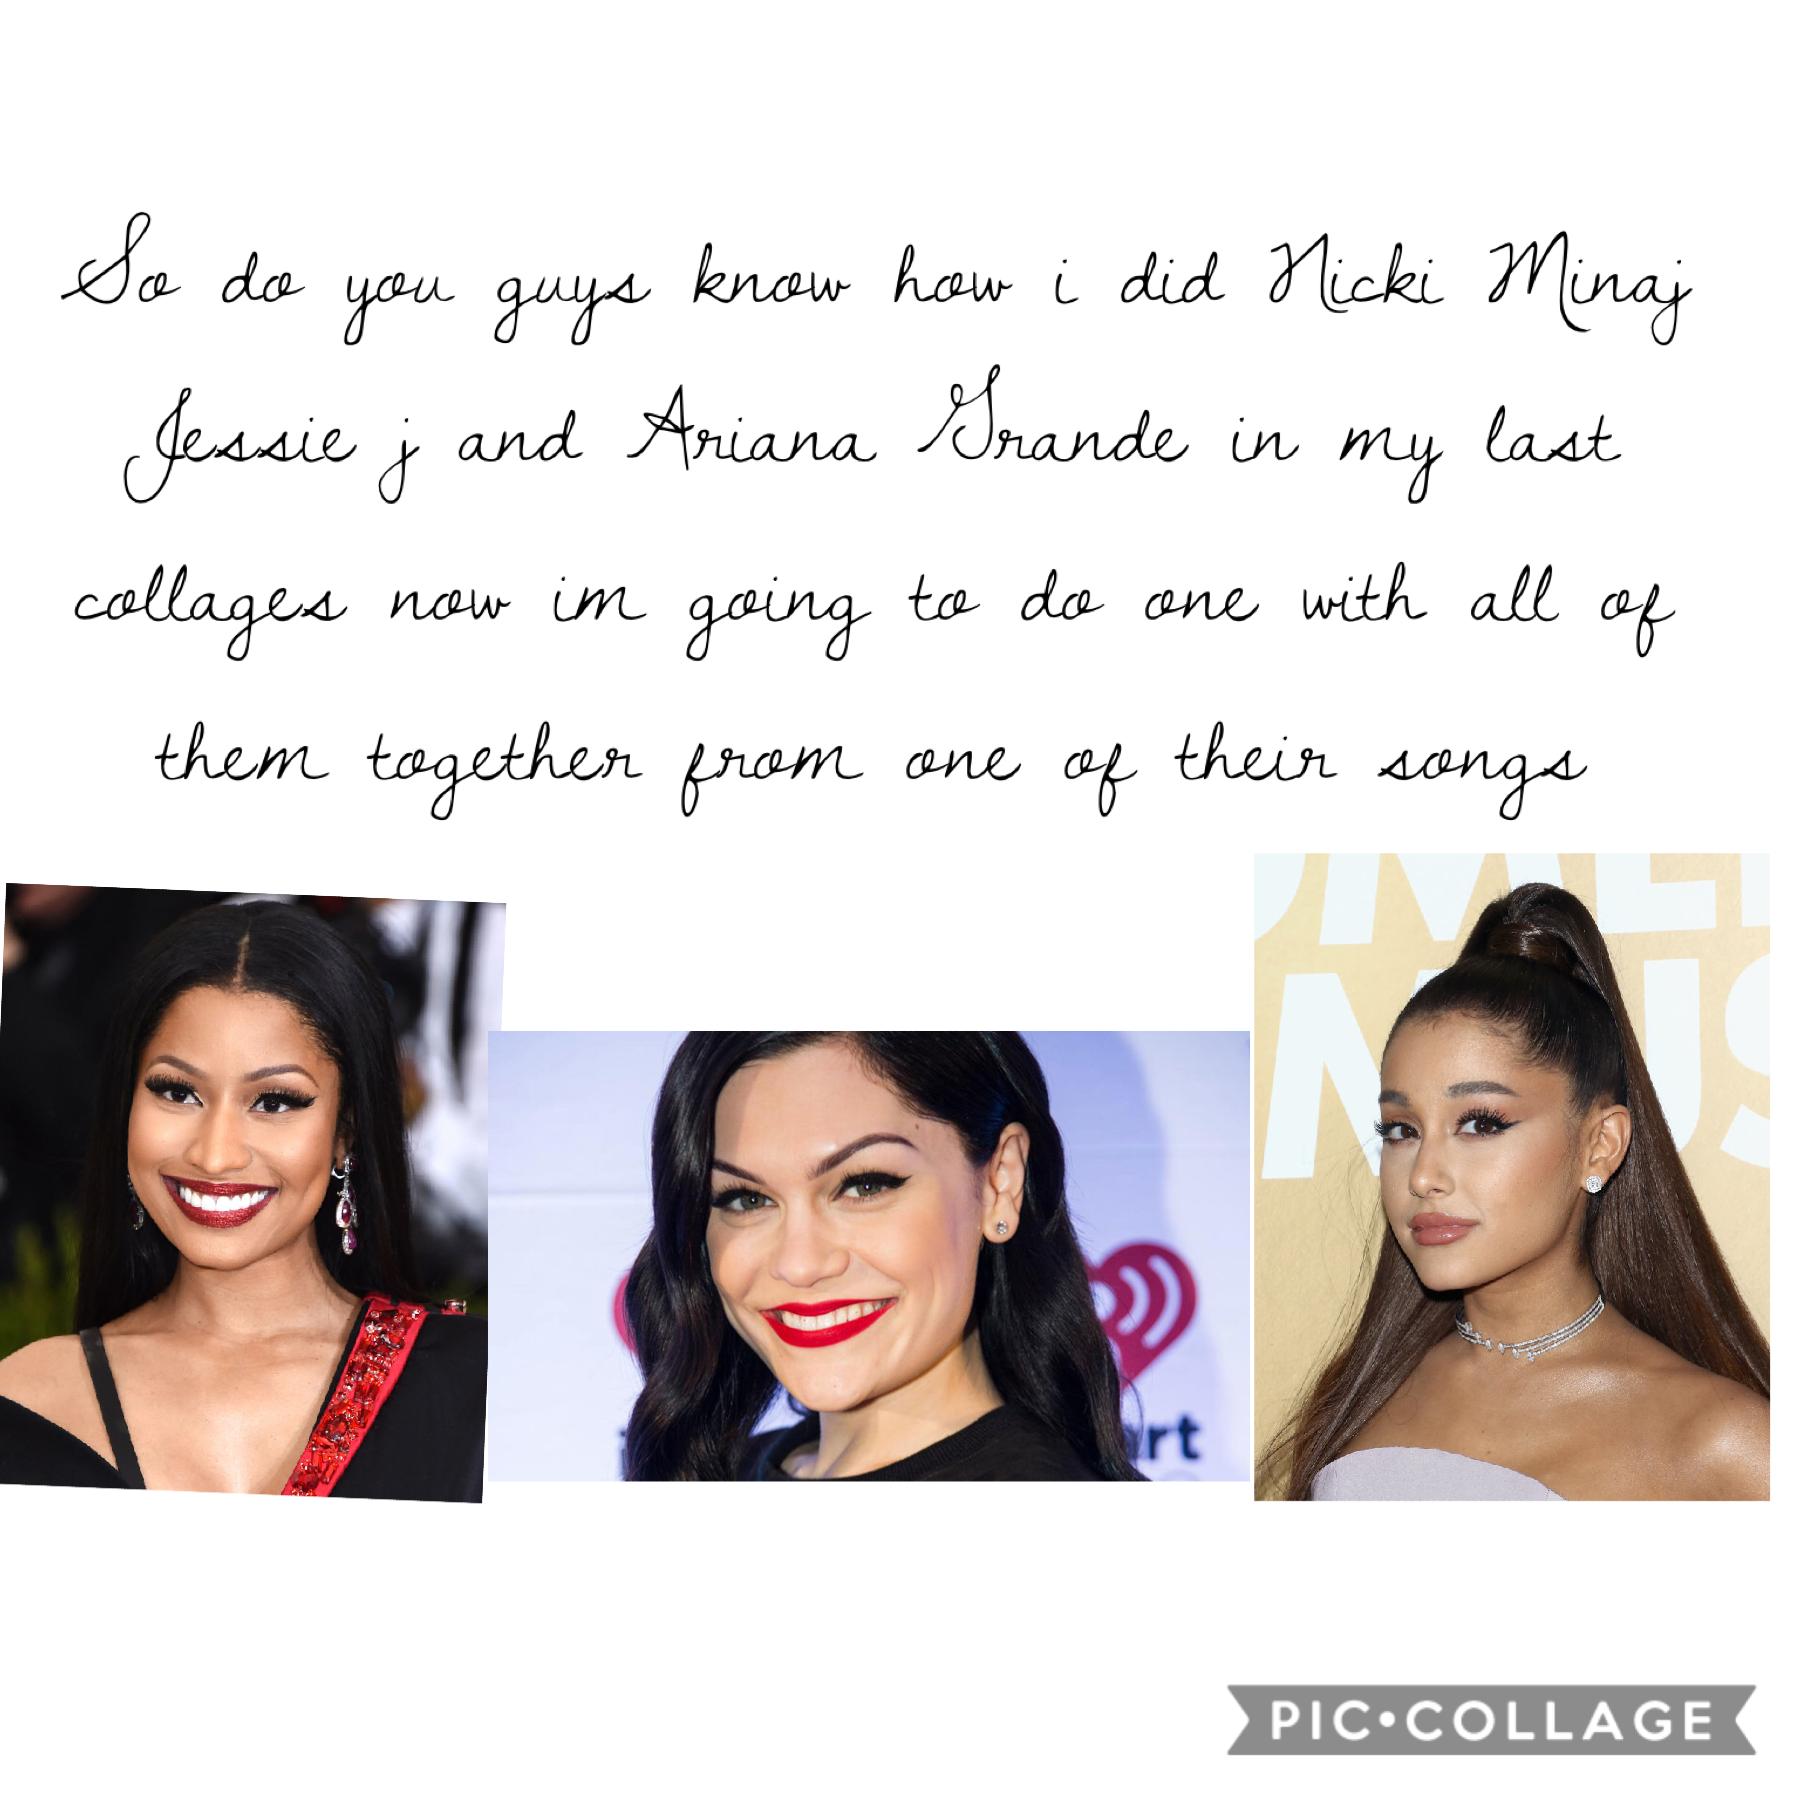 Type in the comments who you like best and repost all collages that you can and im going to only give you permission to only repost my Nicki Minaj Ariana Grande and Jessie j